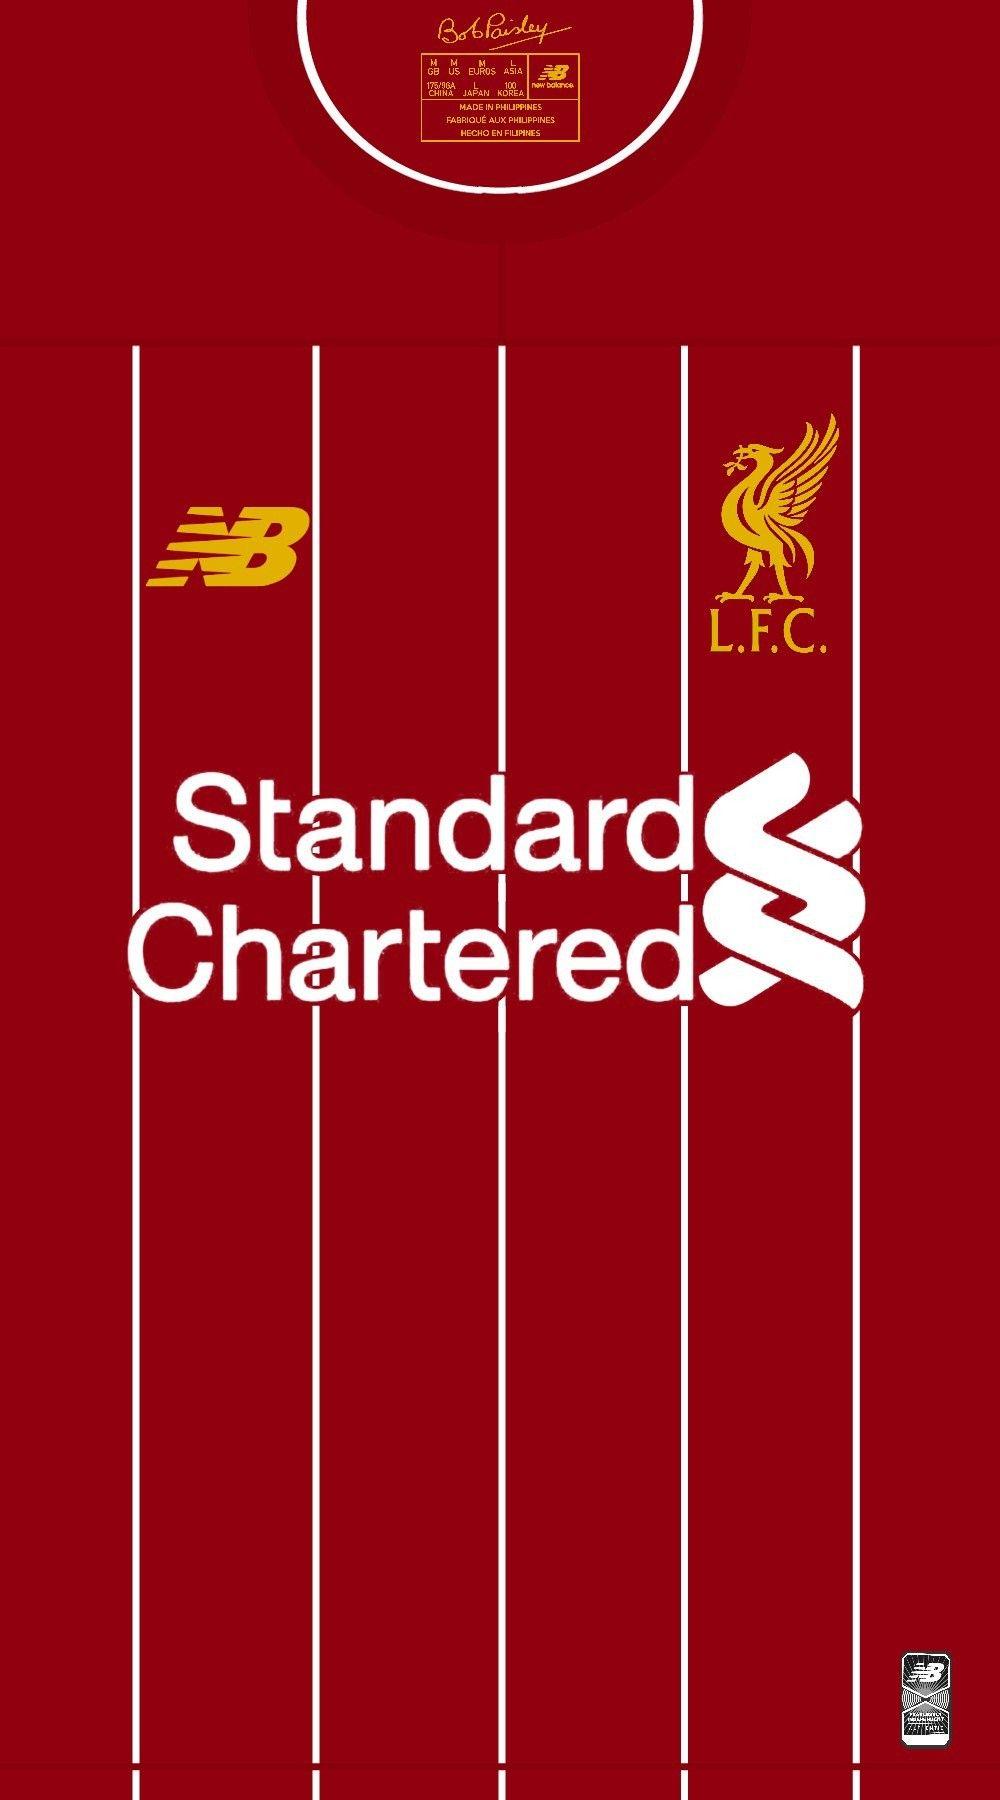 Free download Liverpool home 2019 2020 Liverpool anfield Liverpool